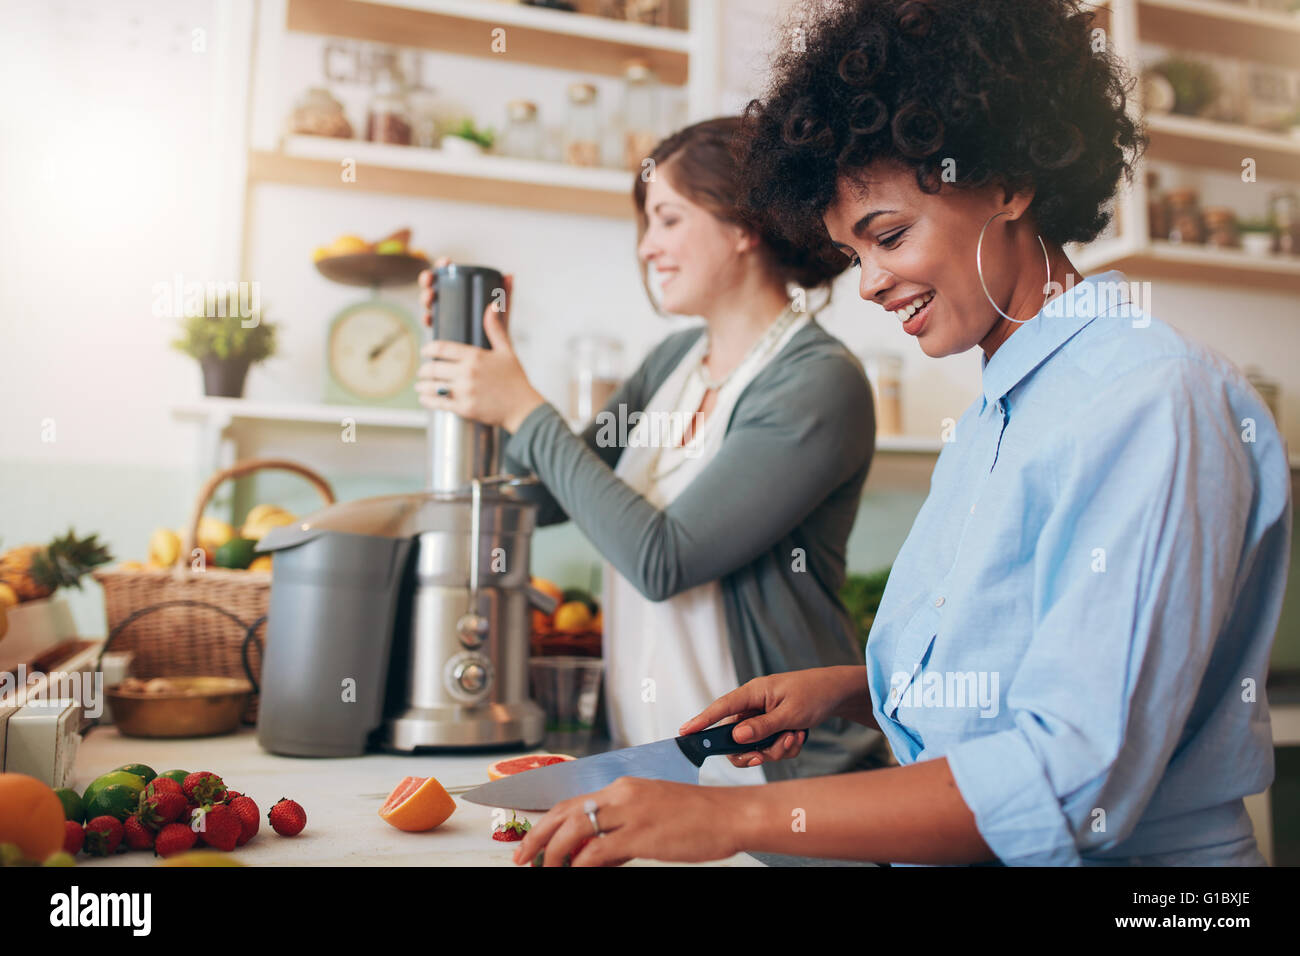 Smiling young woman cutting fruits with coworker using juicer in background, two women preparing fruit juice at cafe counter. Stock Photo